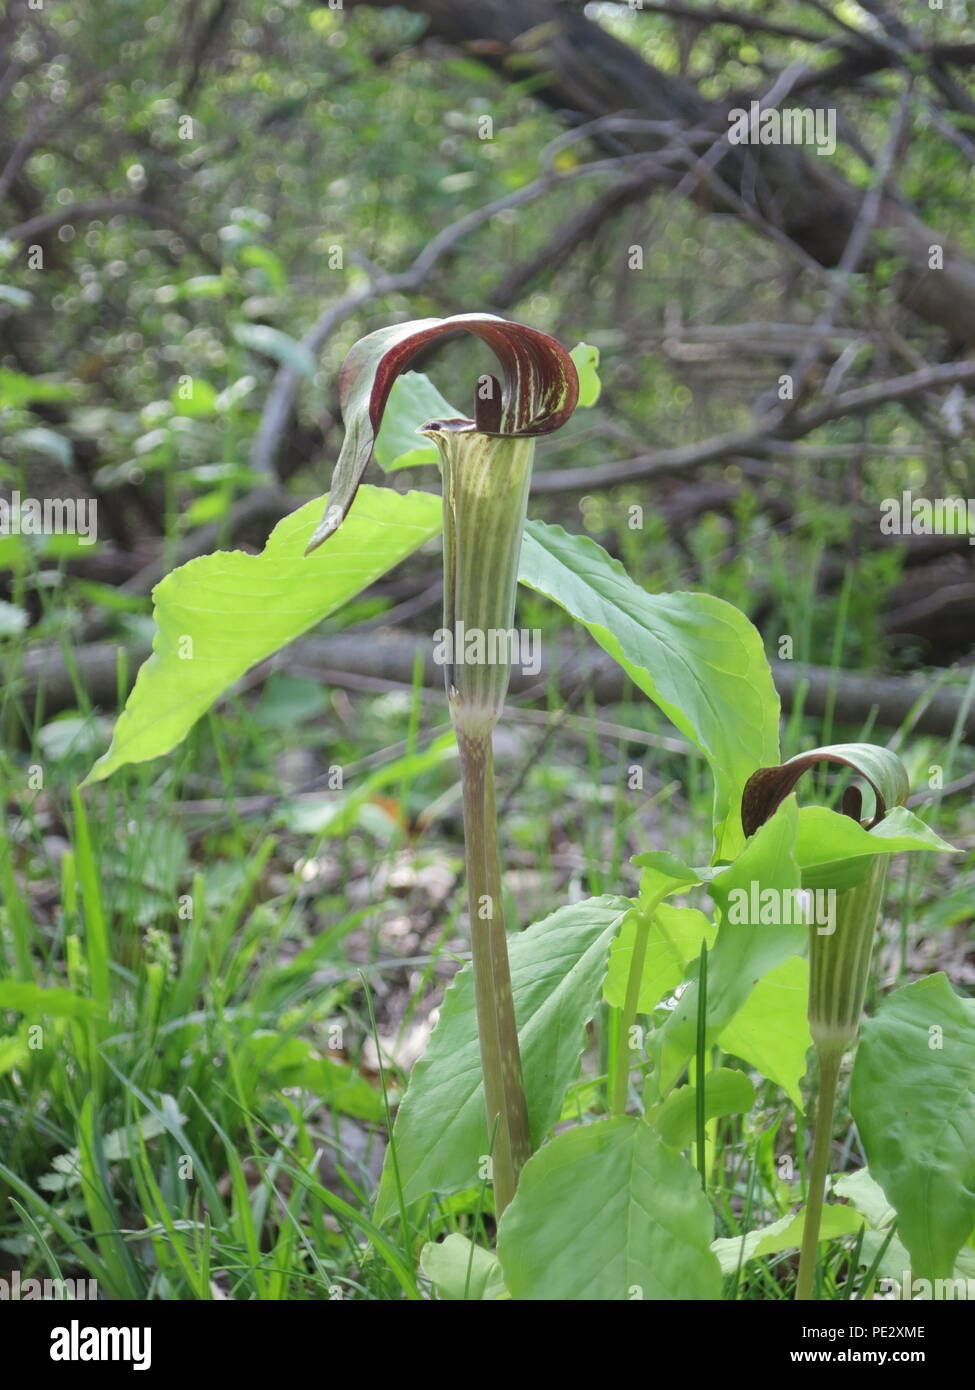 Trumpet pitchers sarracenia meat eating venus flytrap plant growing in the wild green forest nature habitat Stock Photo